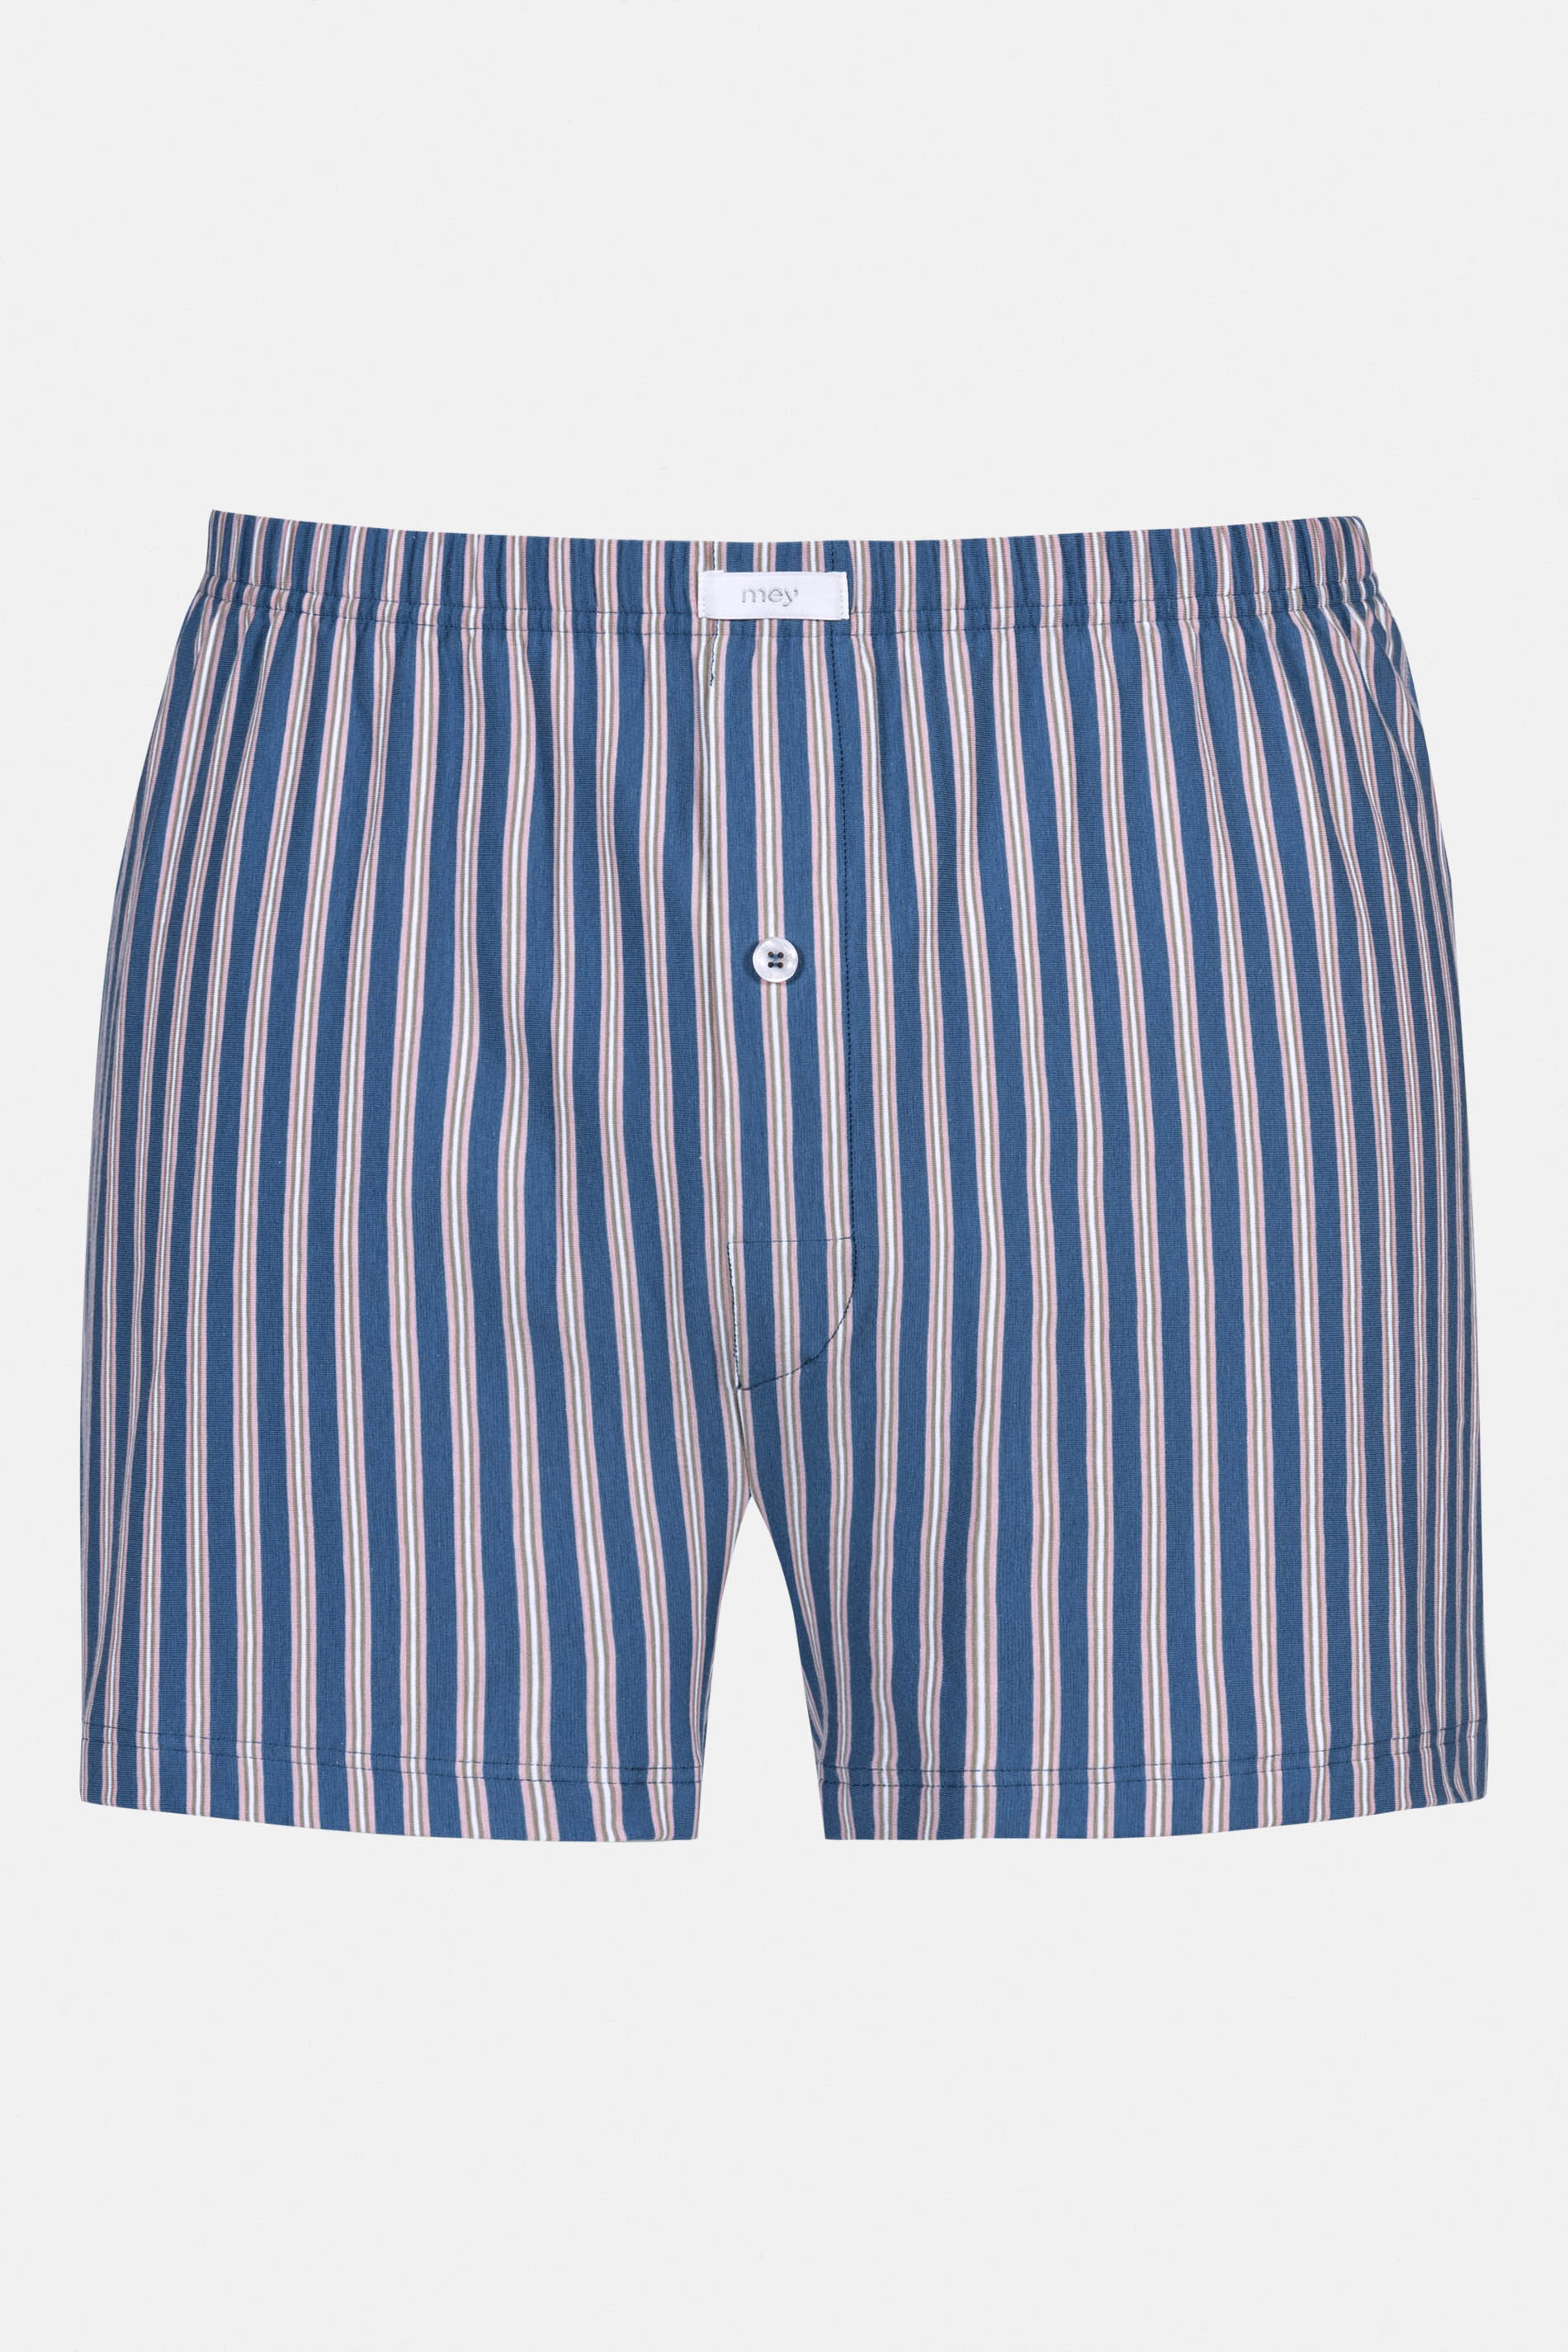 Boxershorts Serie Blue Stripes Uitknippen | mey®